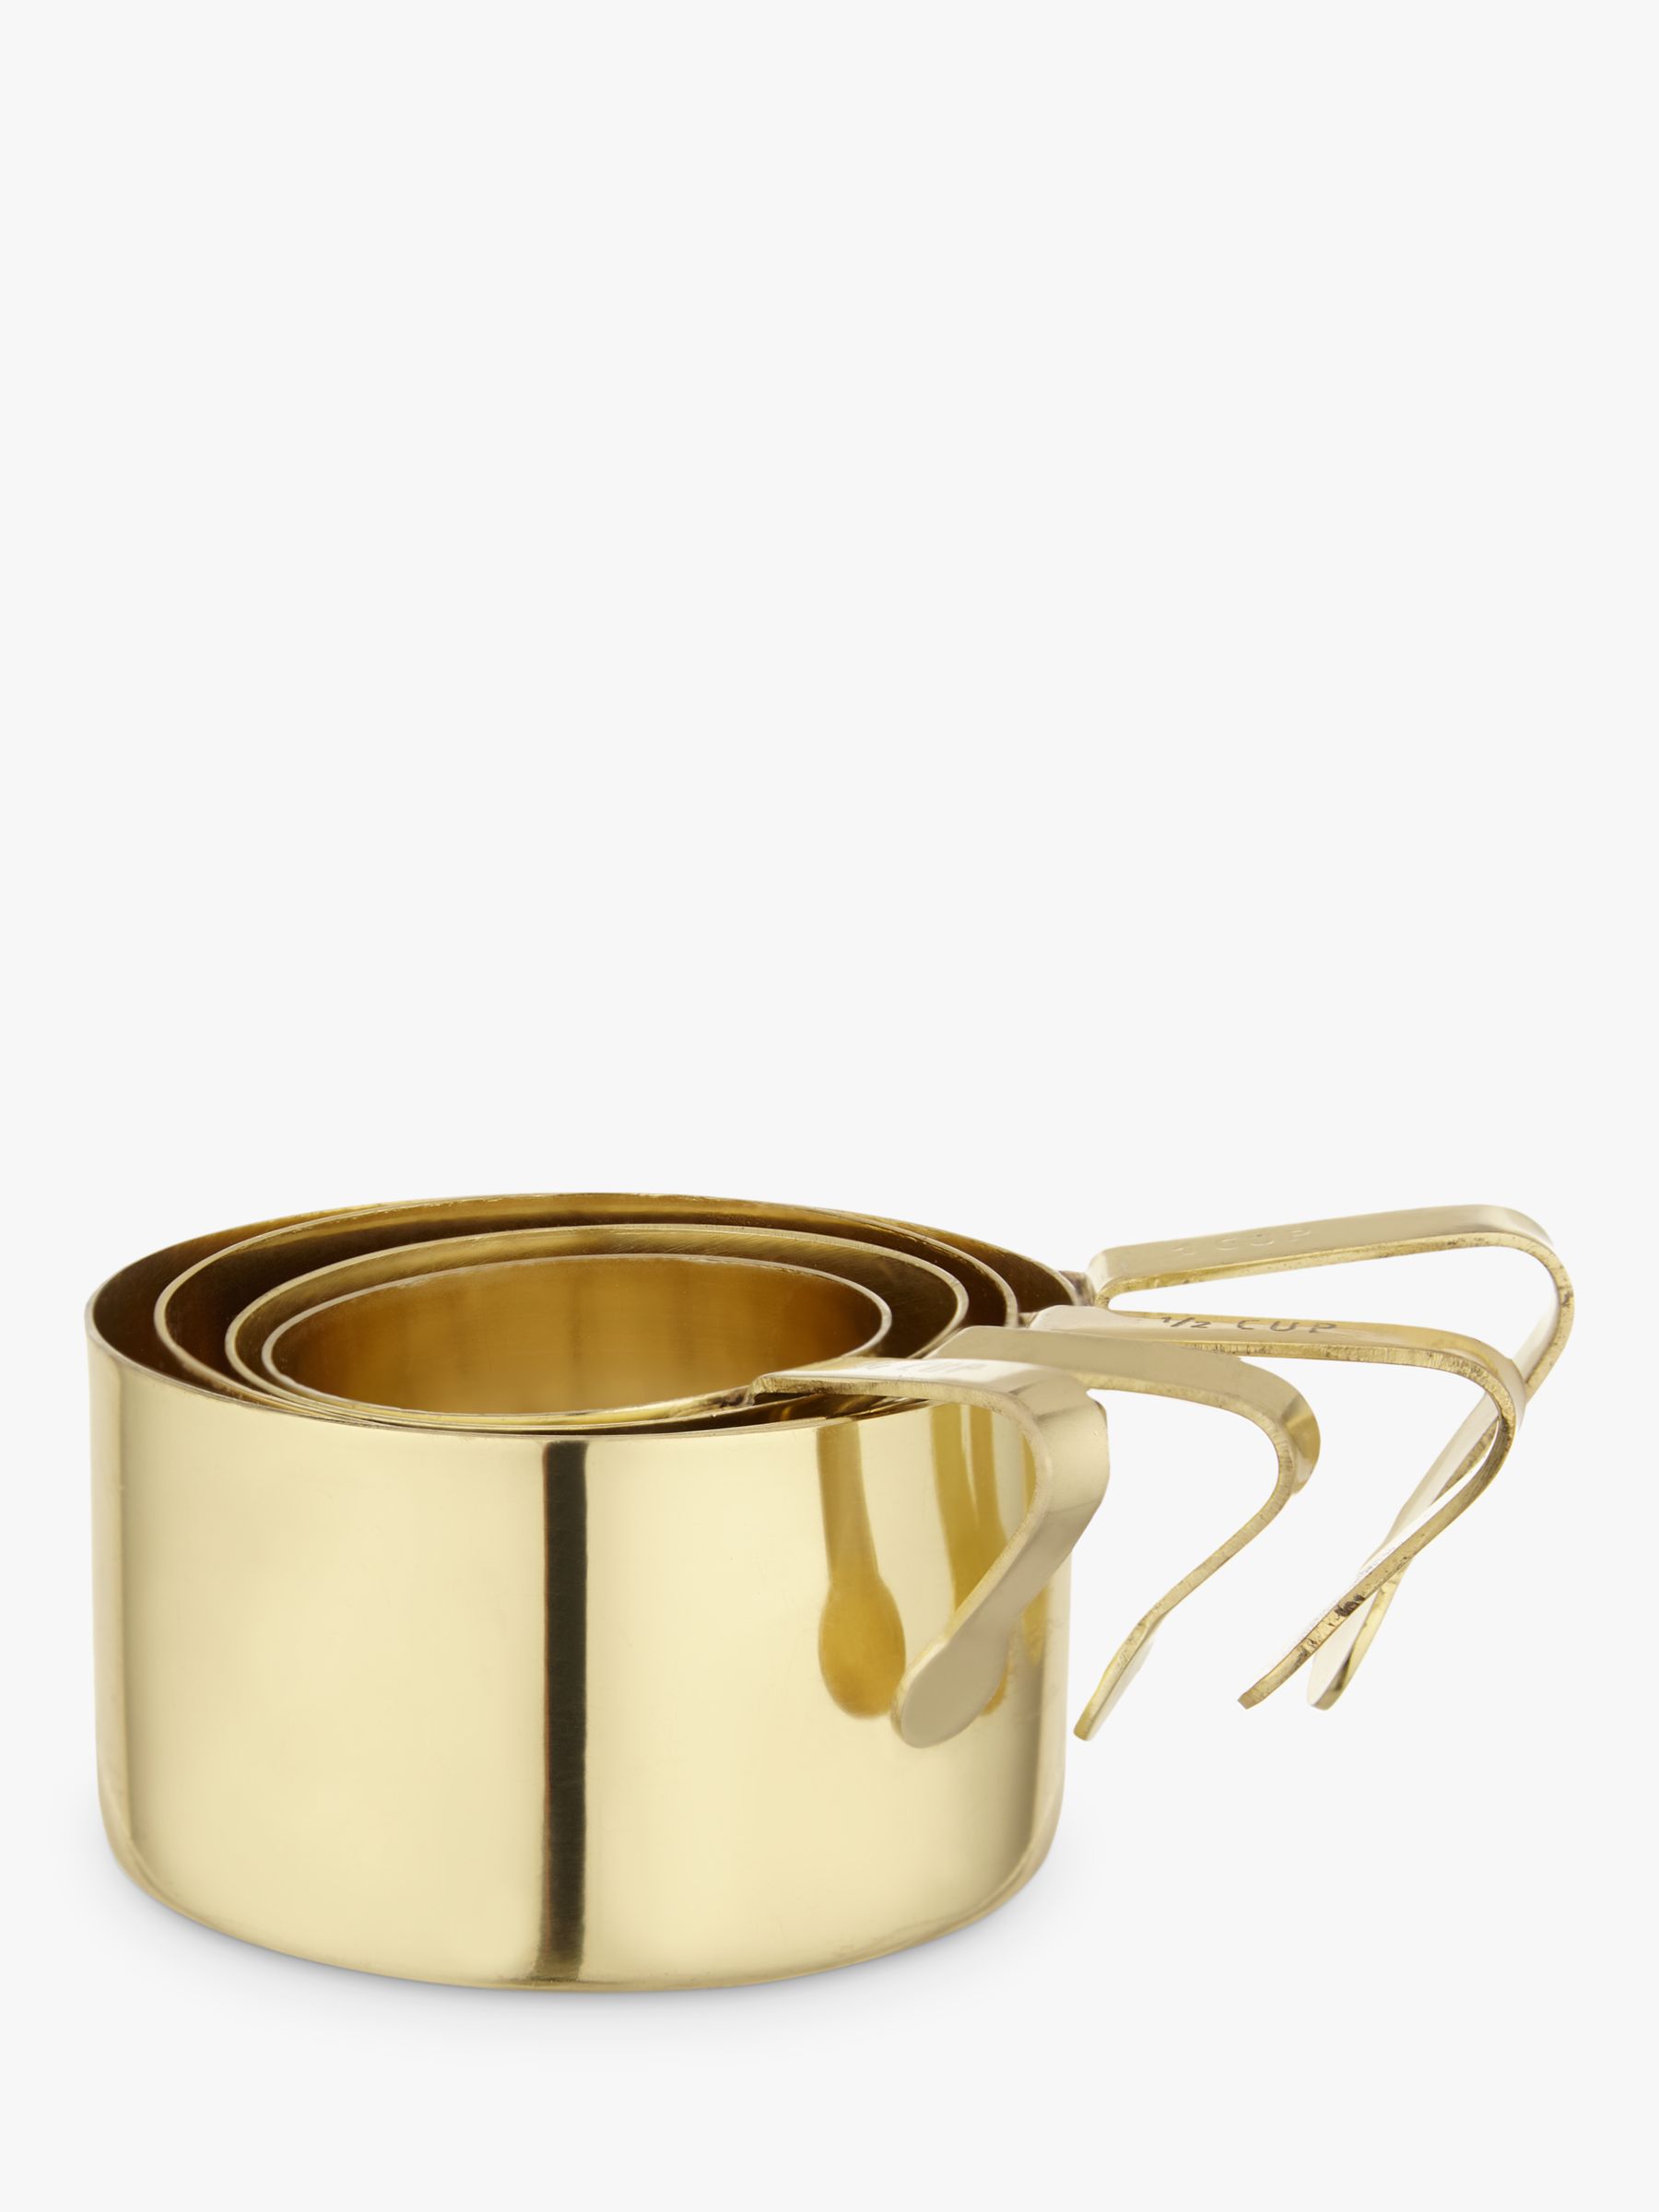 Anthropologie Brass Measuring Cups, Set of 4, Gold